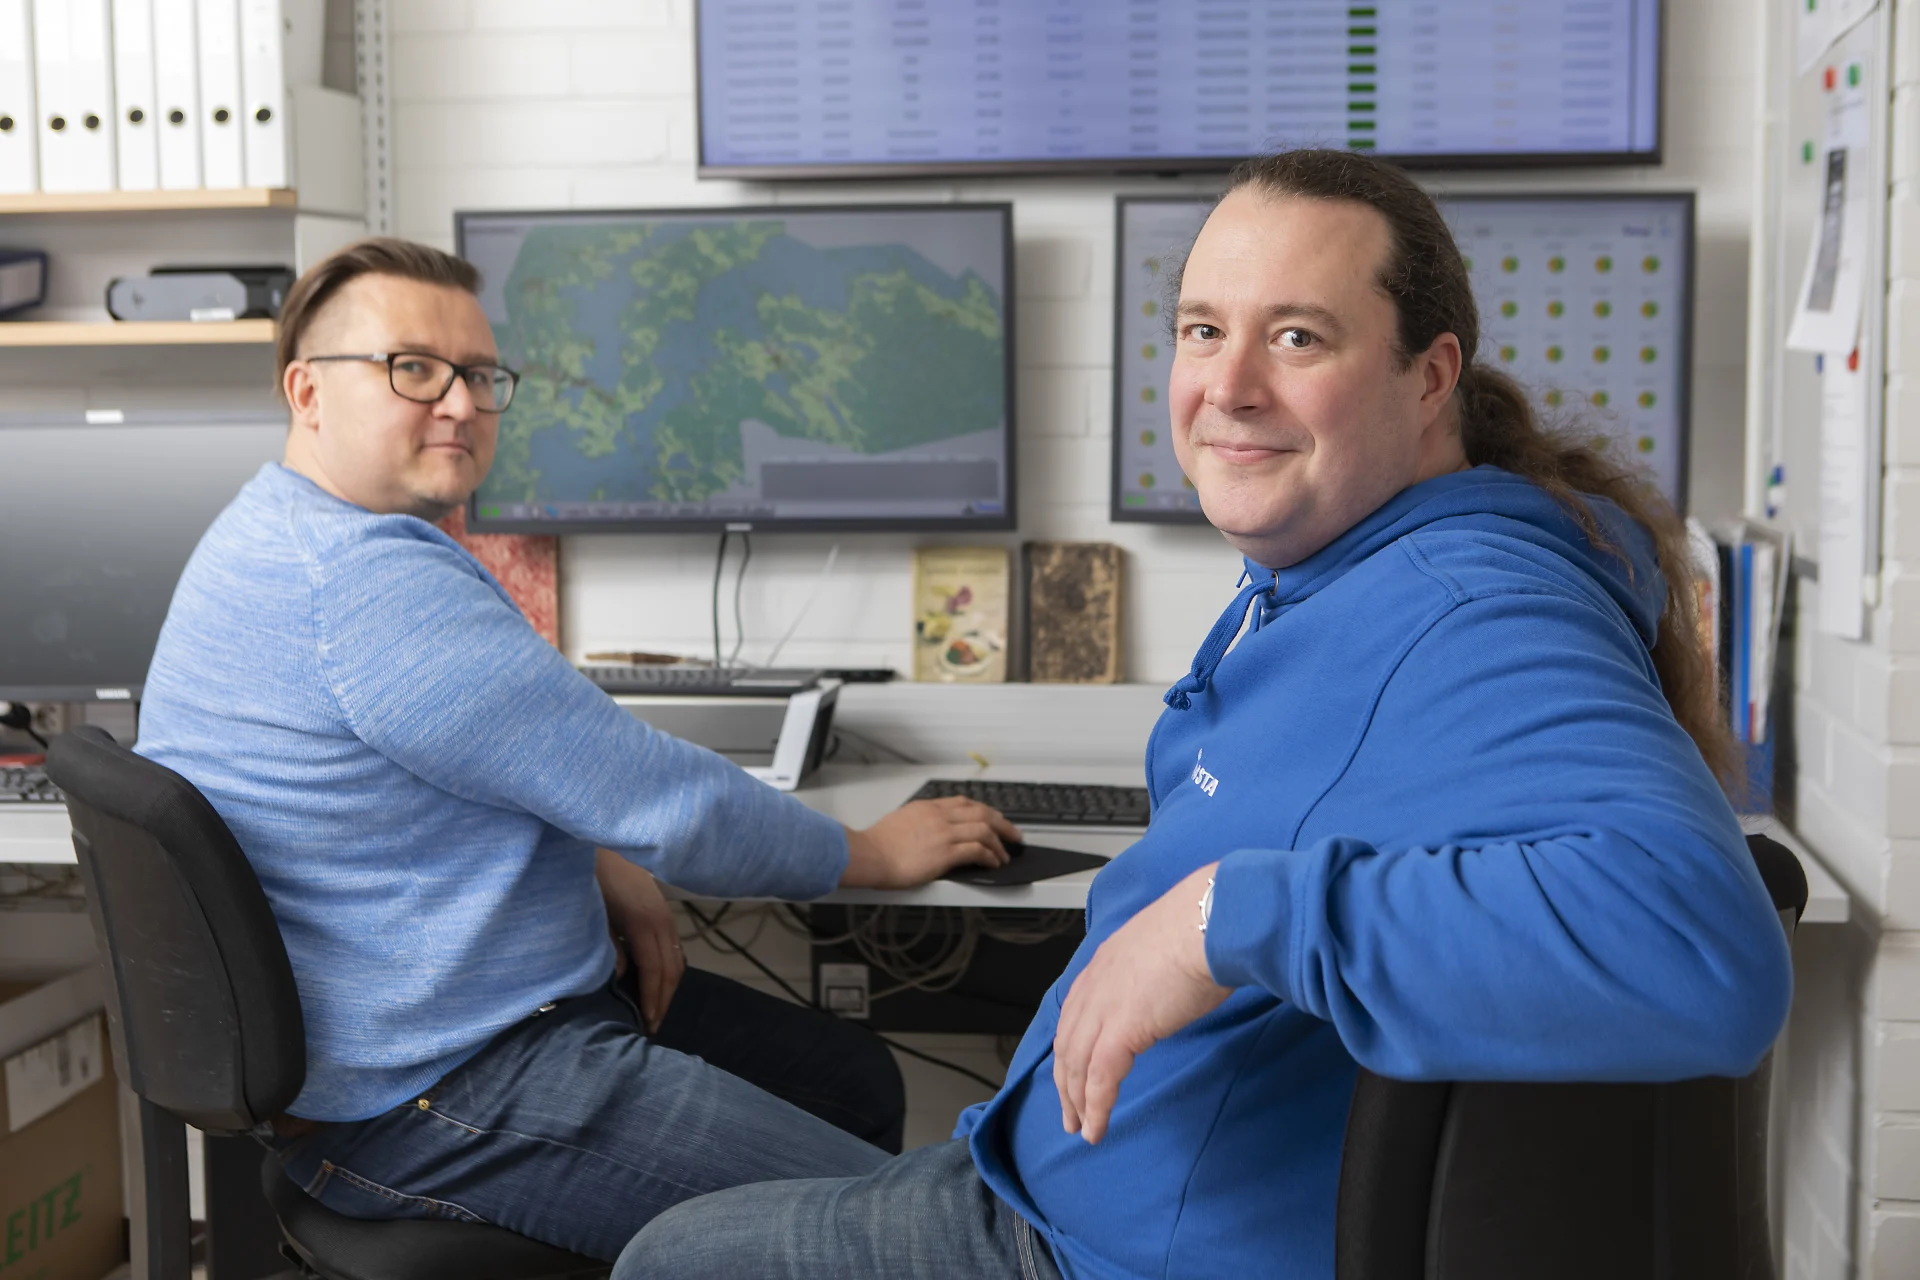 Kangasalan Vesi corporation's Mauno Annala and Insta's Arttu Hanhela sitting by the screens. A map view and situational picture graphs are displayed.